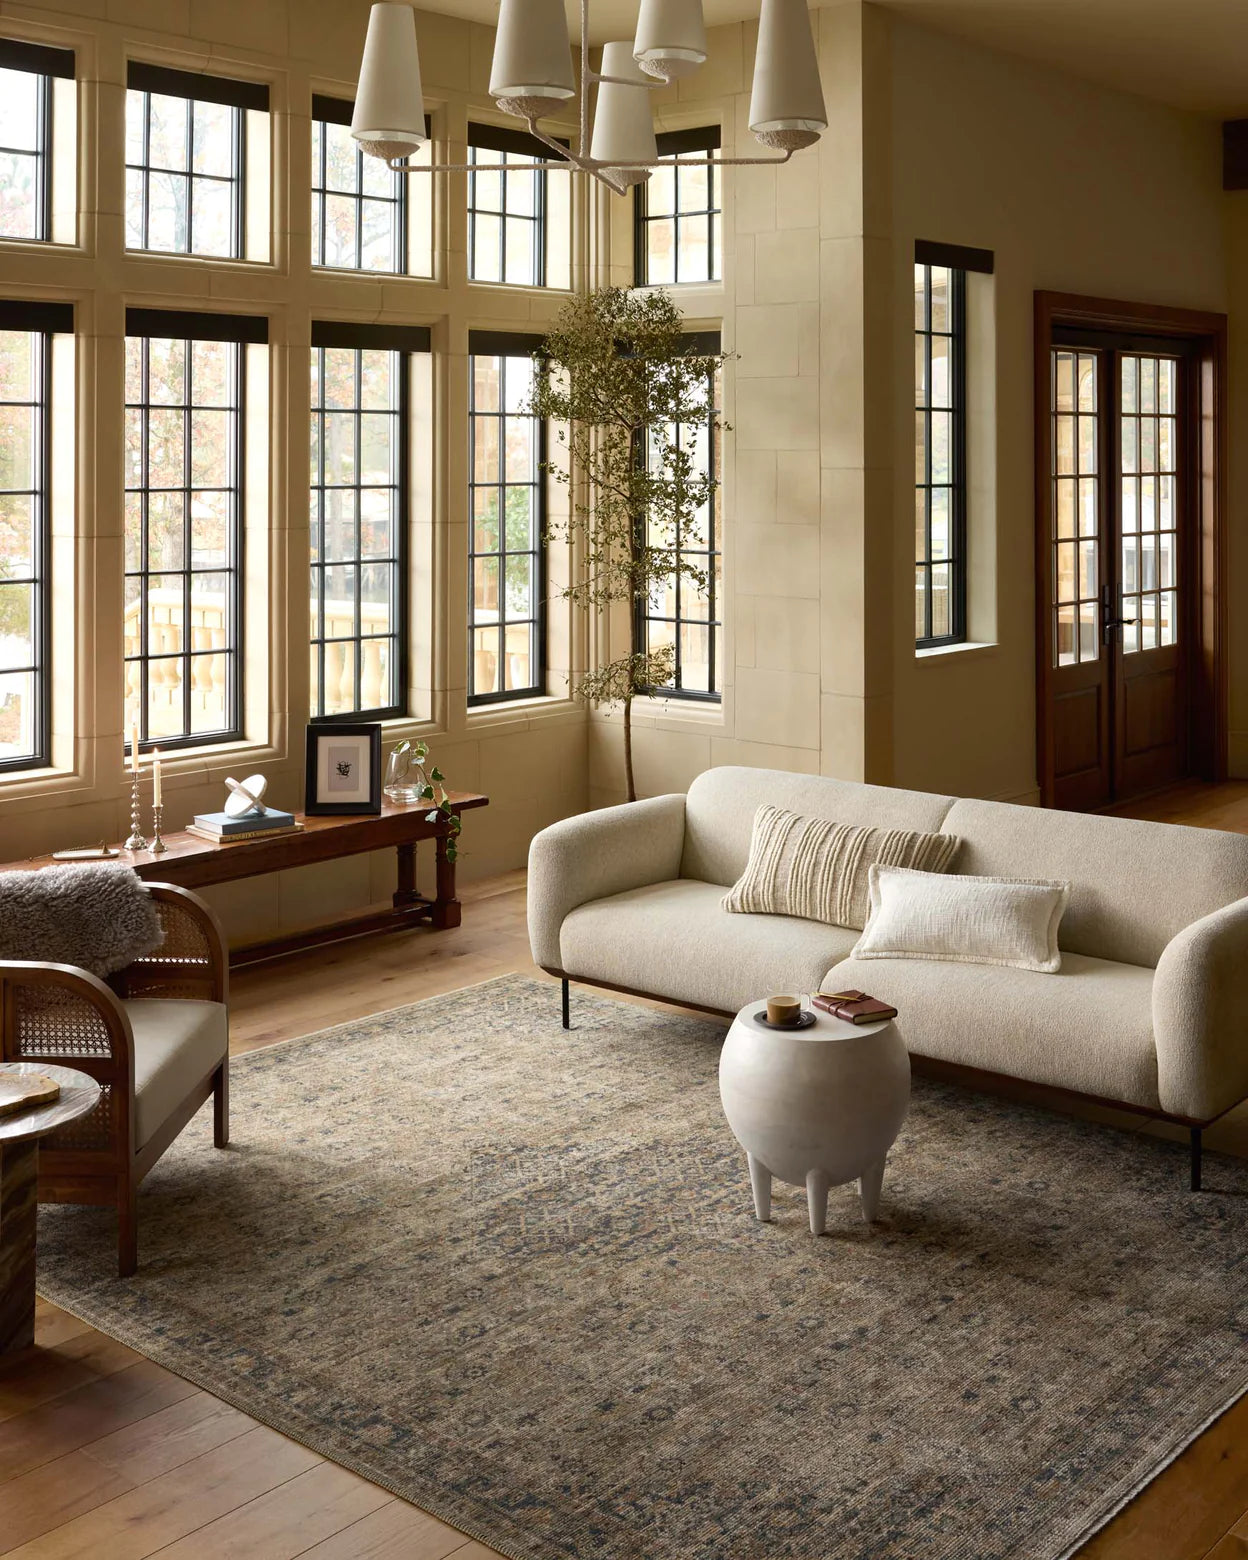 A cozy living room in a Scottsdale bungalow, featuring a large beige sofa, a white round coffee table, and a wicker chair. The room includes large windows, wooden floors, and beige walls decorated with touches of greenery. The room is anchored by a Sage / Navy rug from Loloi Rugs.